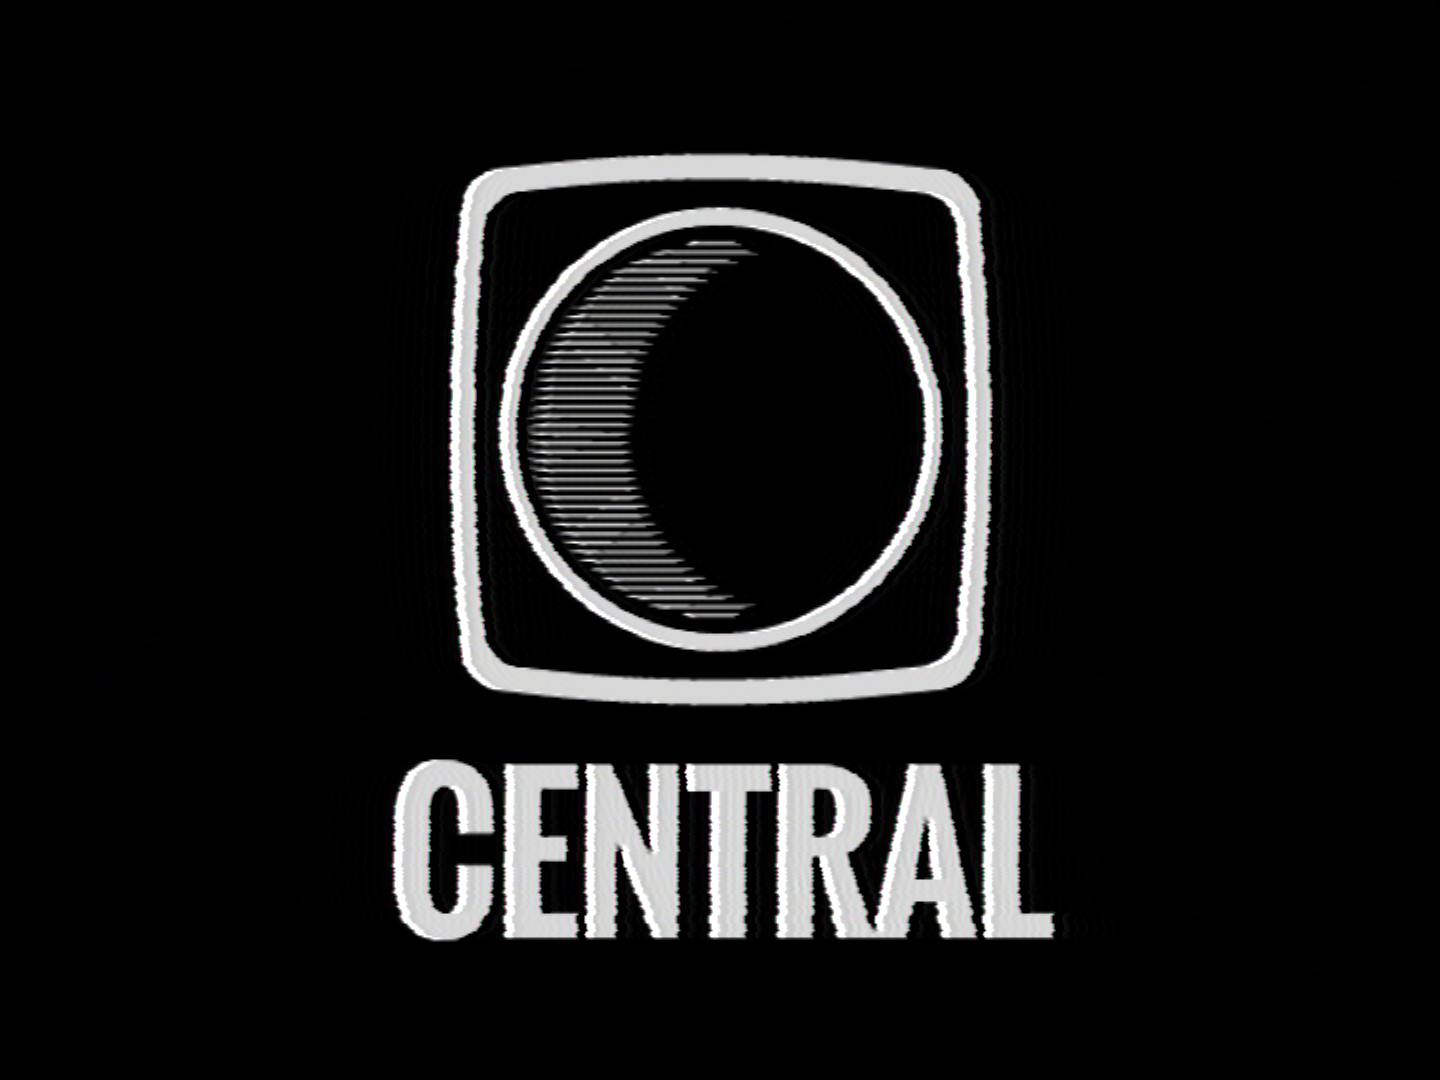 Central Network ID (1960s)